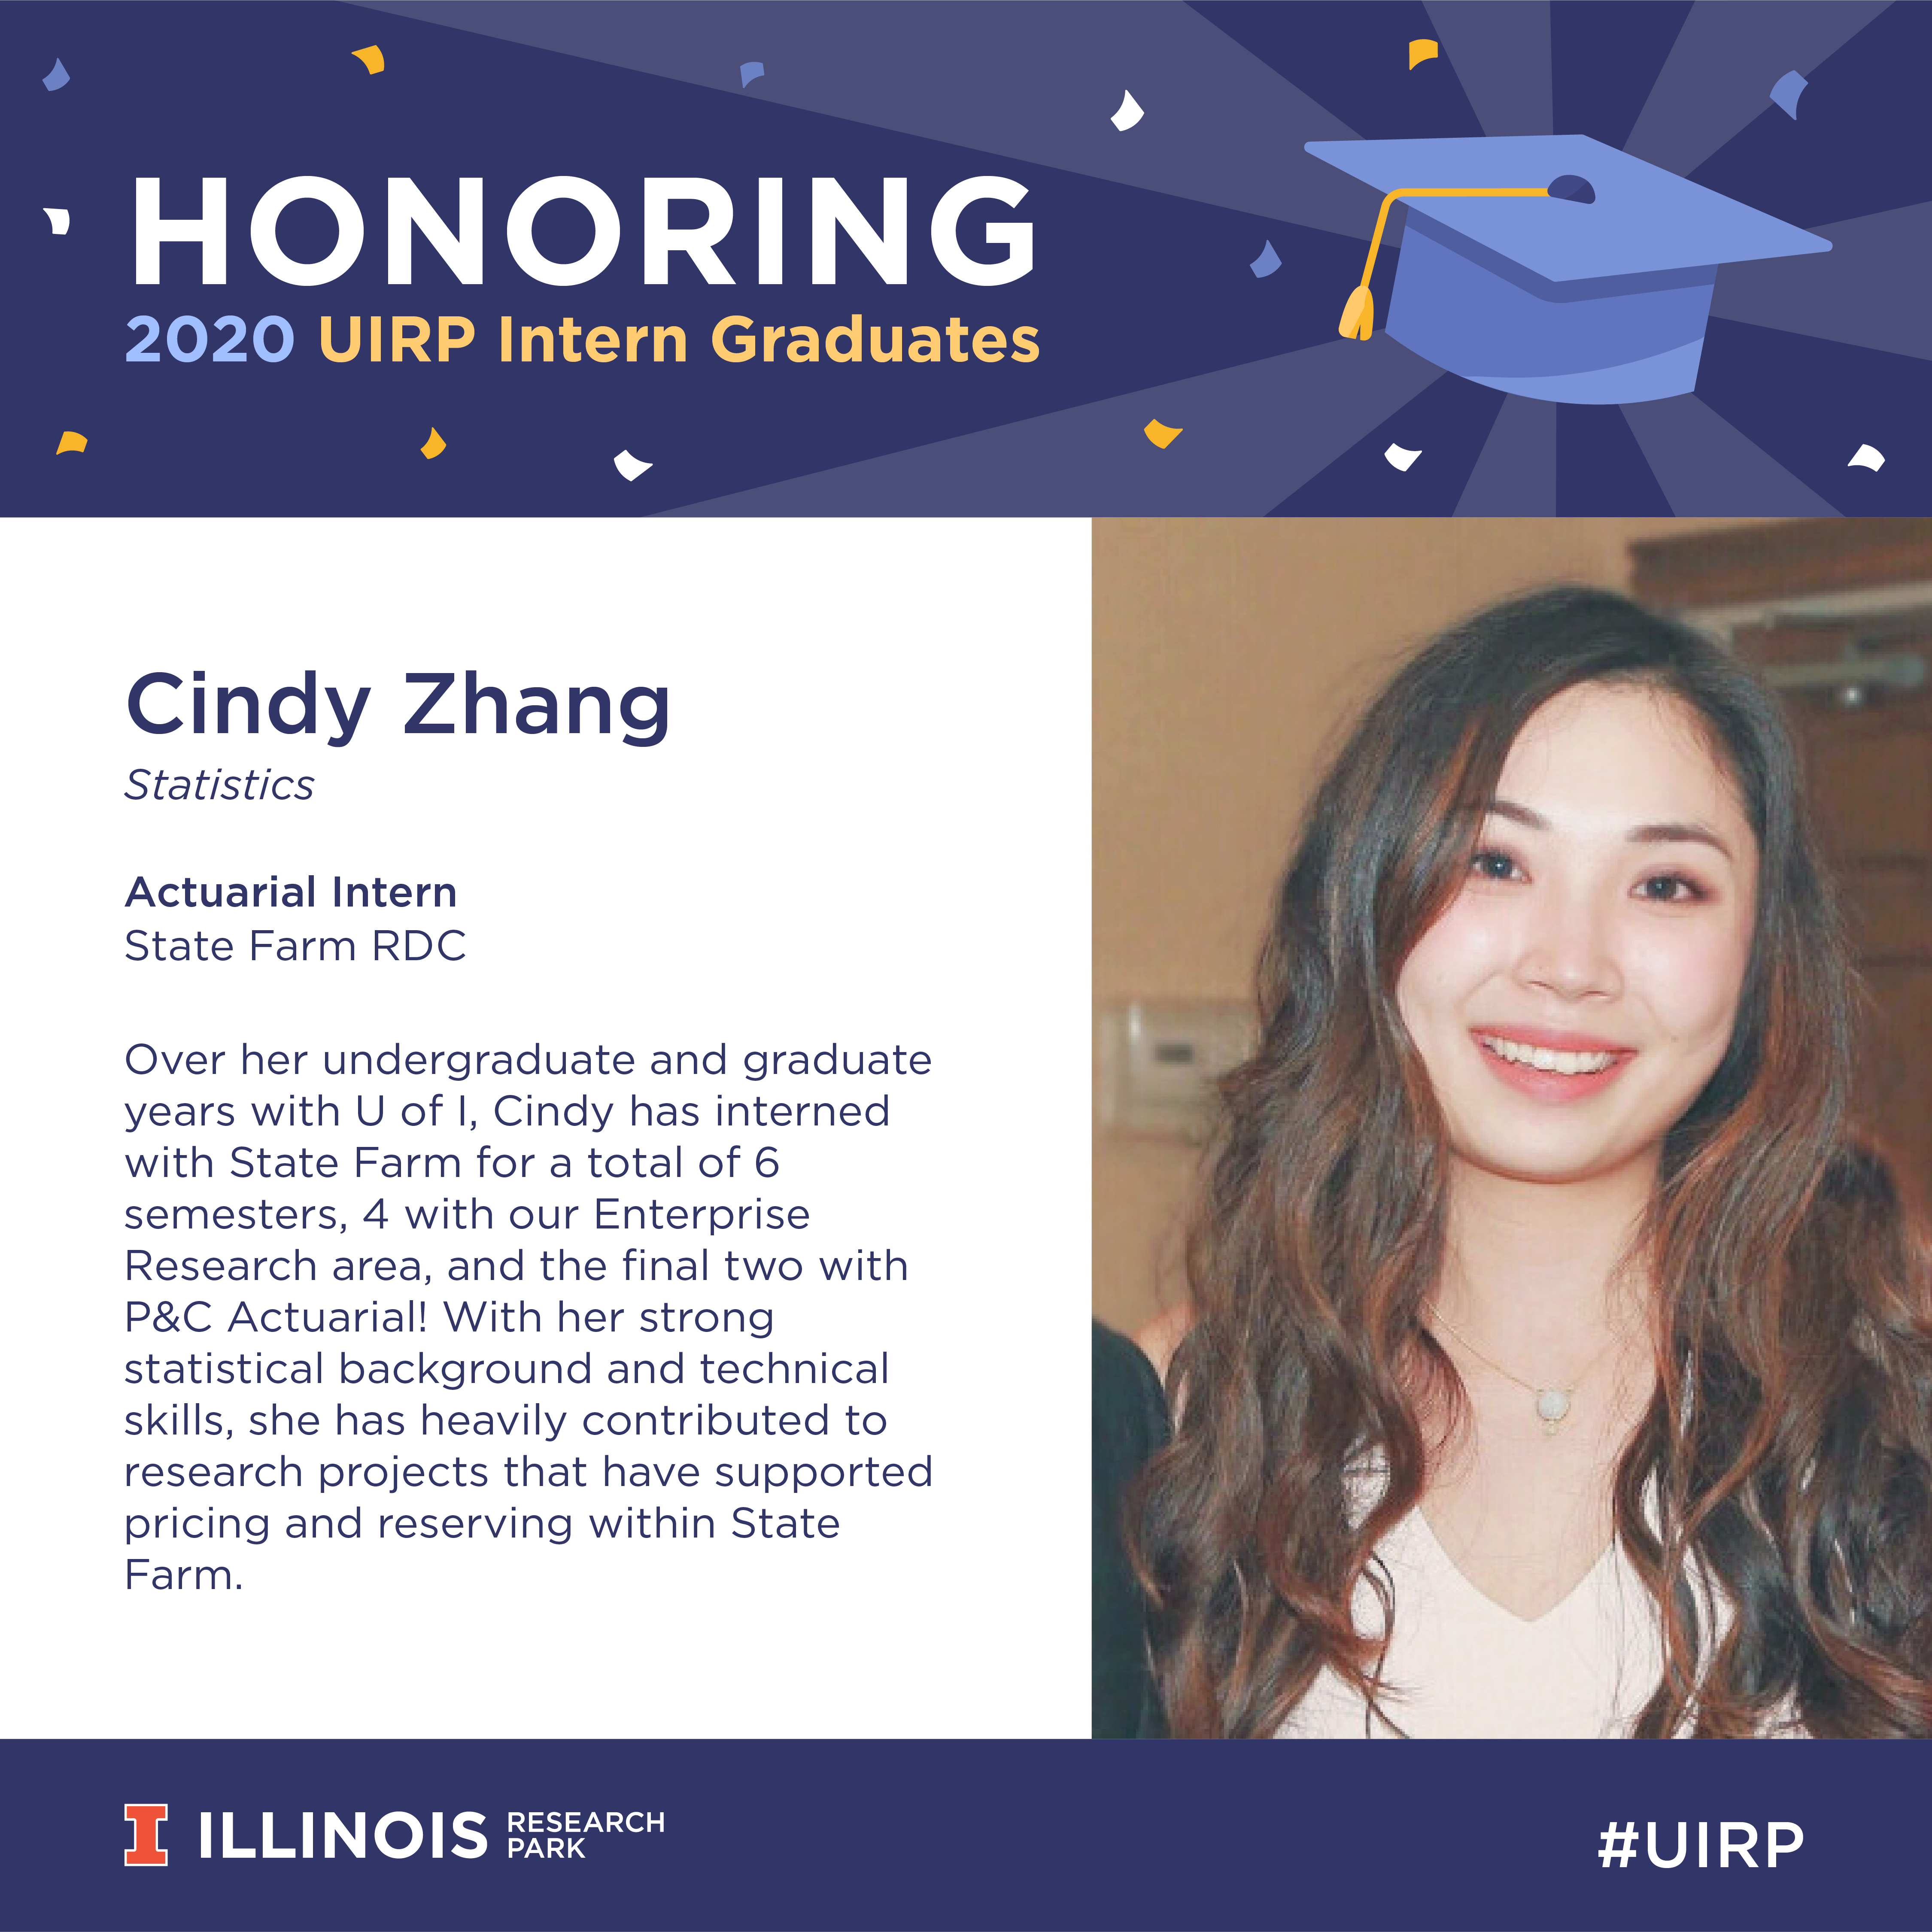 Cindy Zhang, Actuarial Intern at State Farm